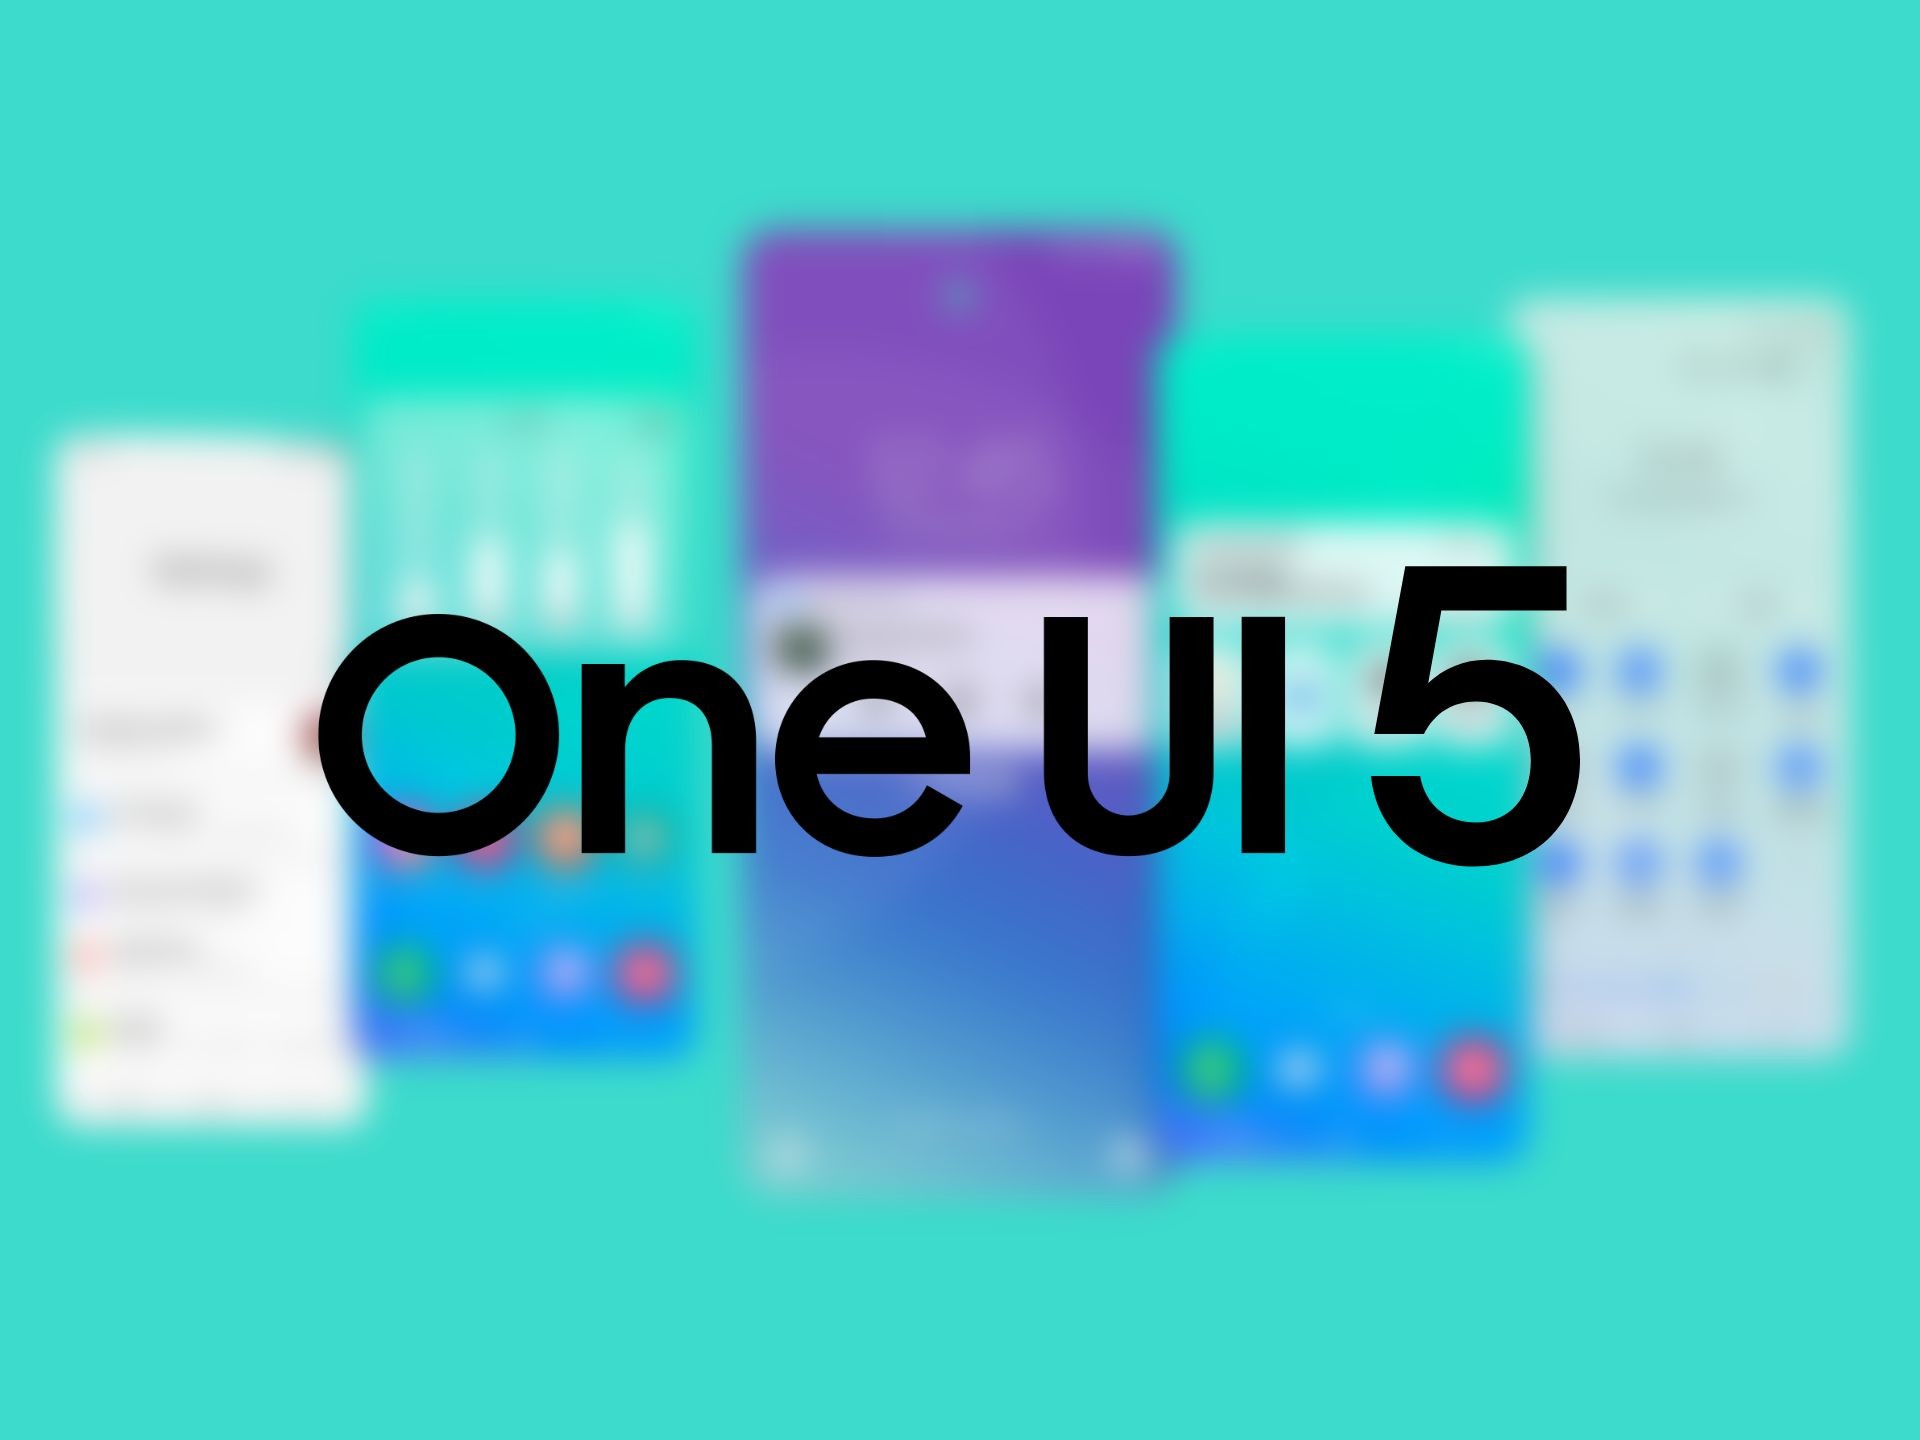 Five features I’m looking forward to the most in One UI 5